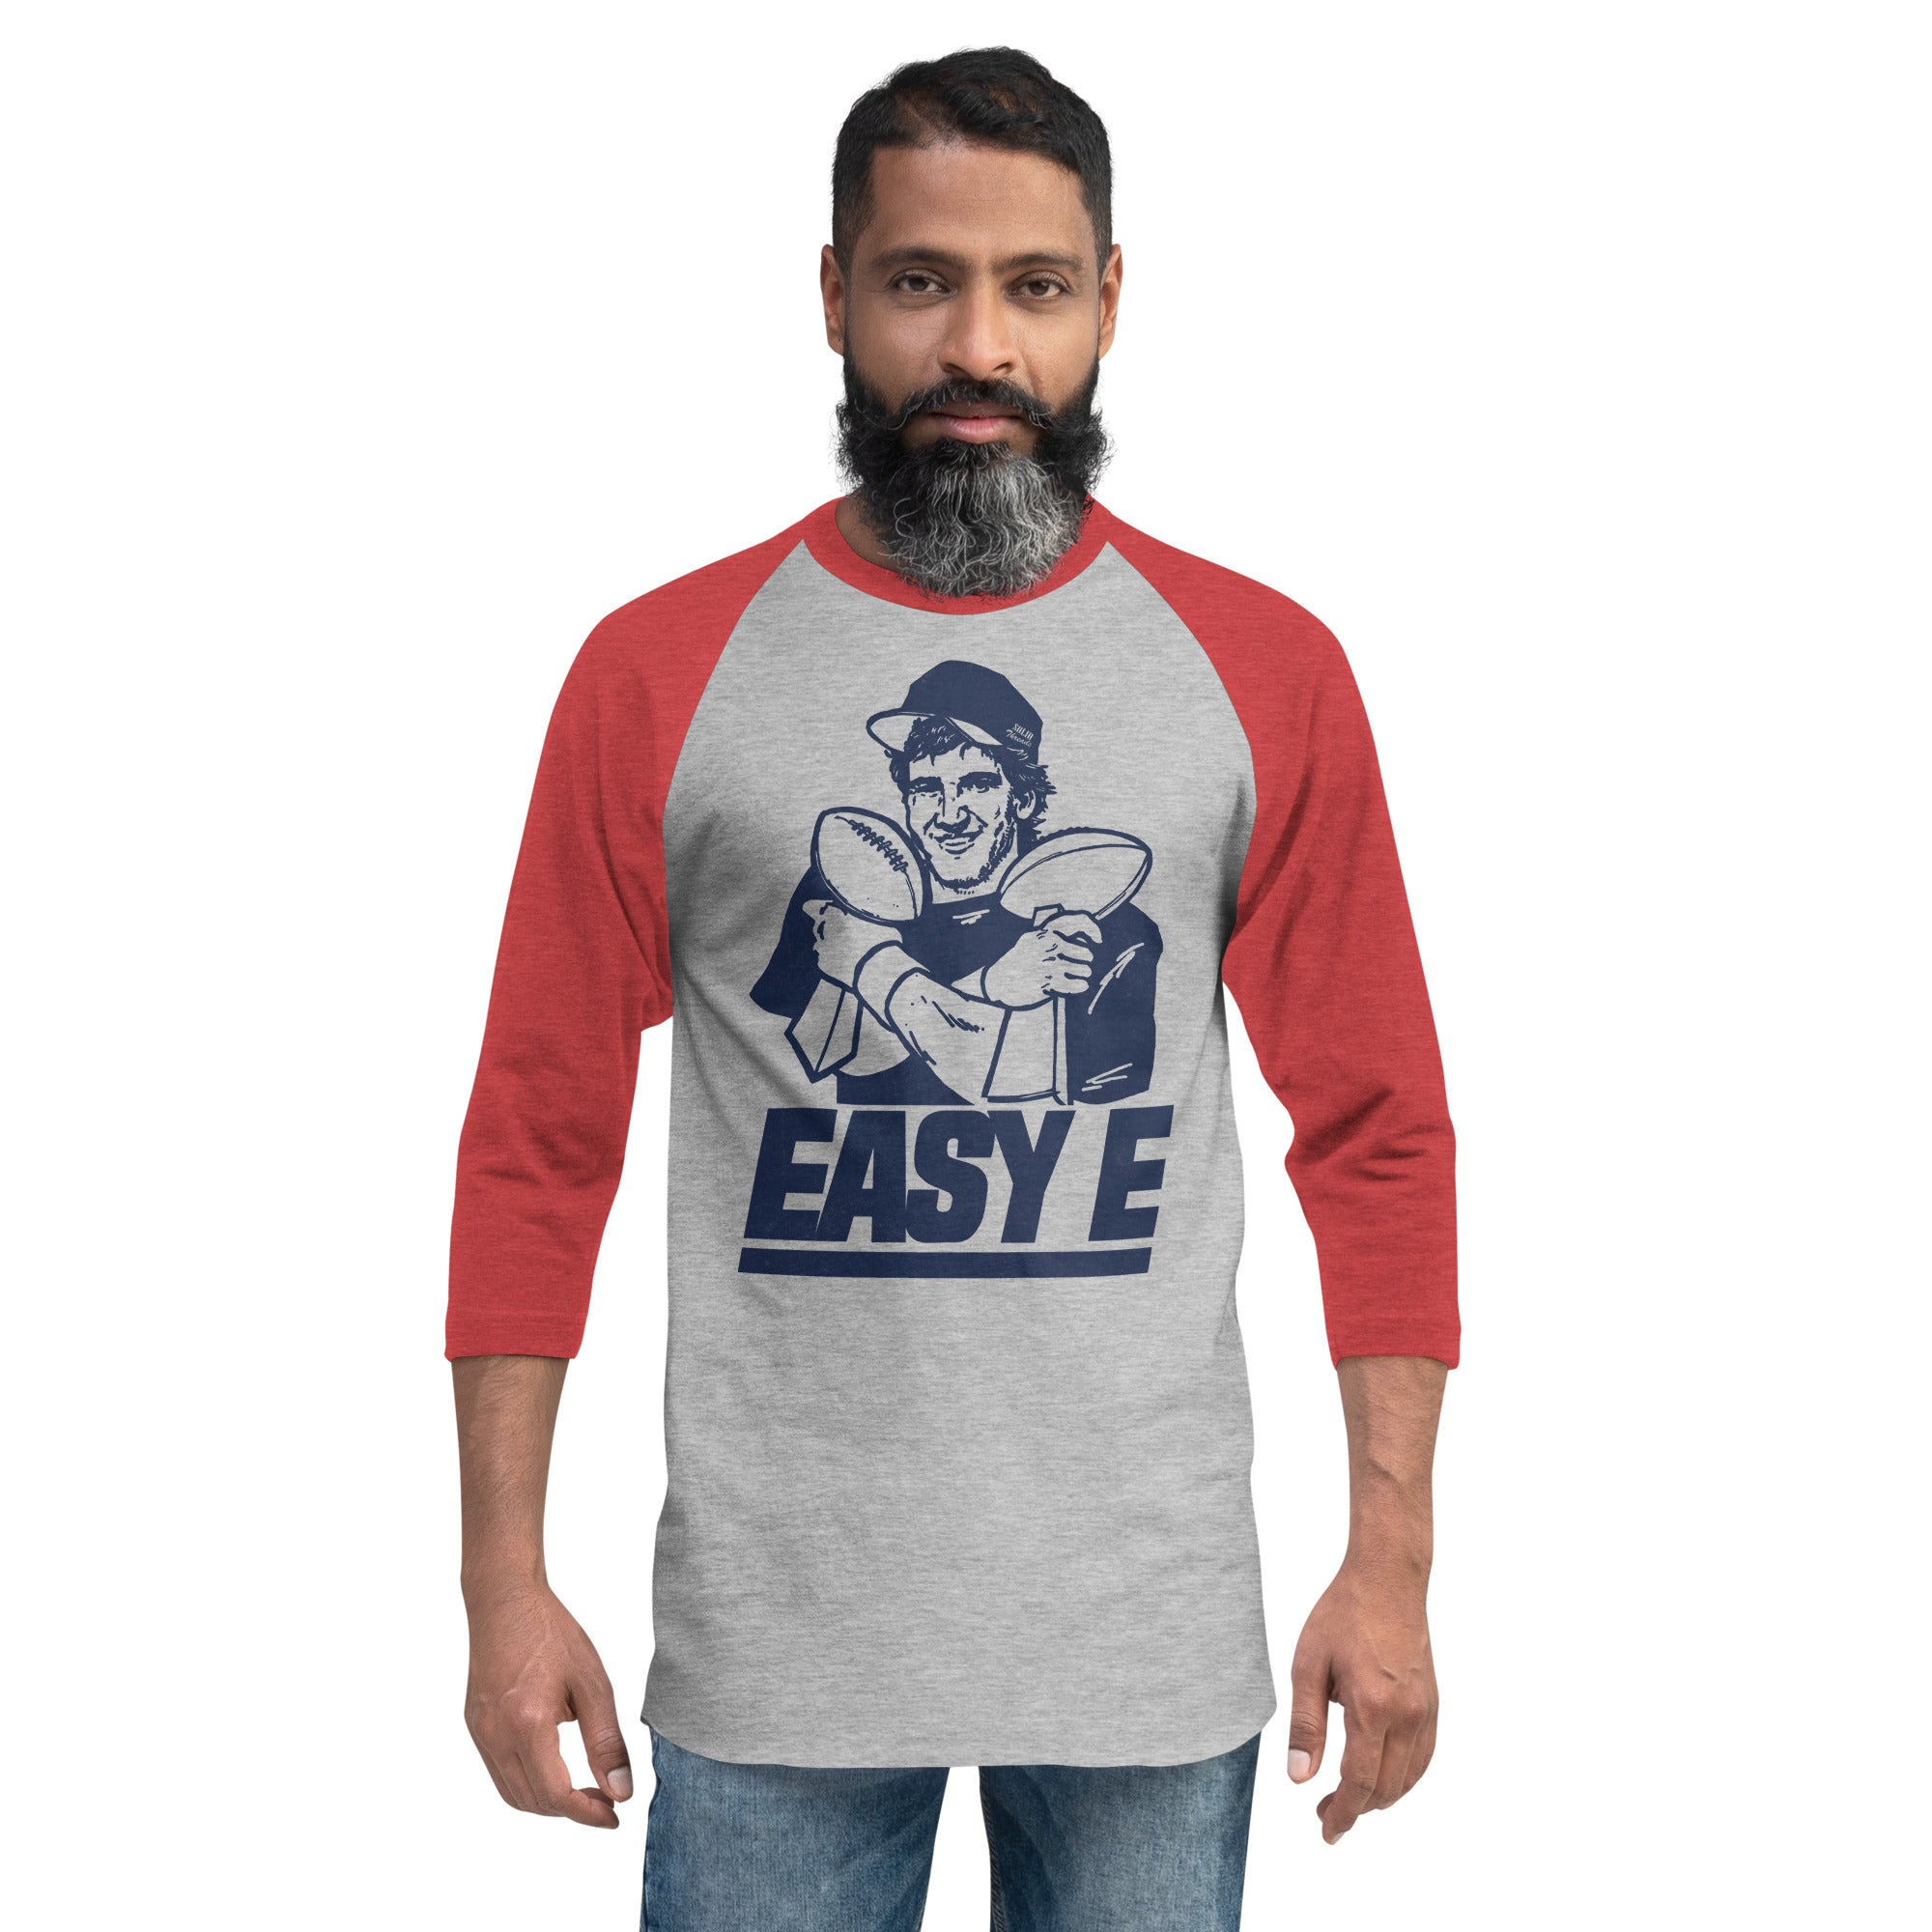 Easy E Vintage Sports Graphic Raglan Tee | Funny NY Giants Grey Baseball T-shirt on Male Model | Solid Threads